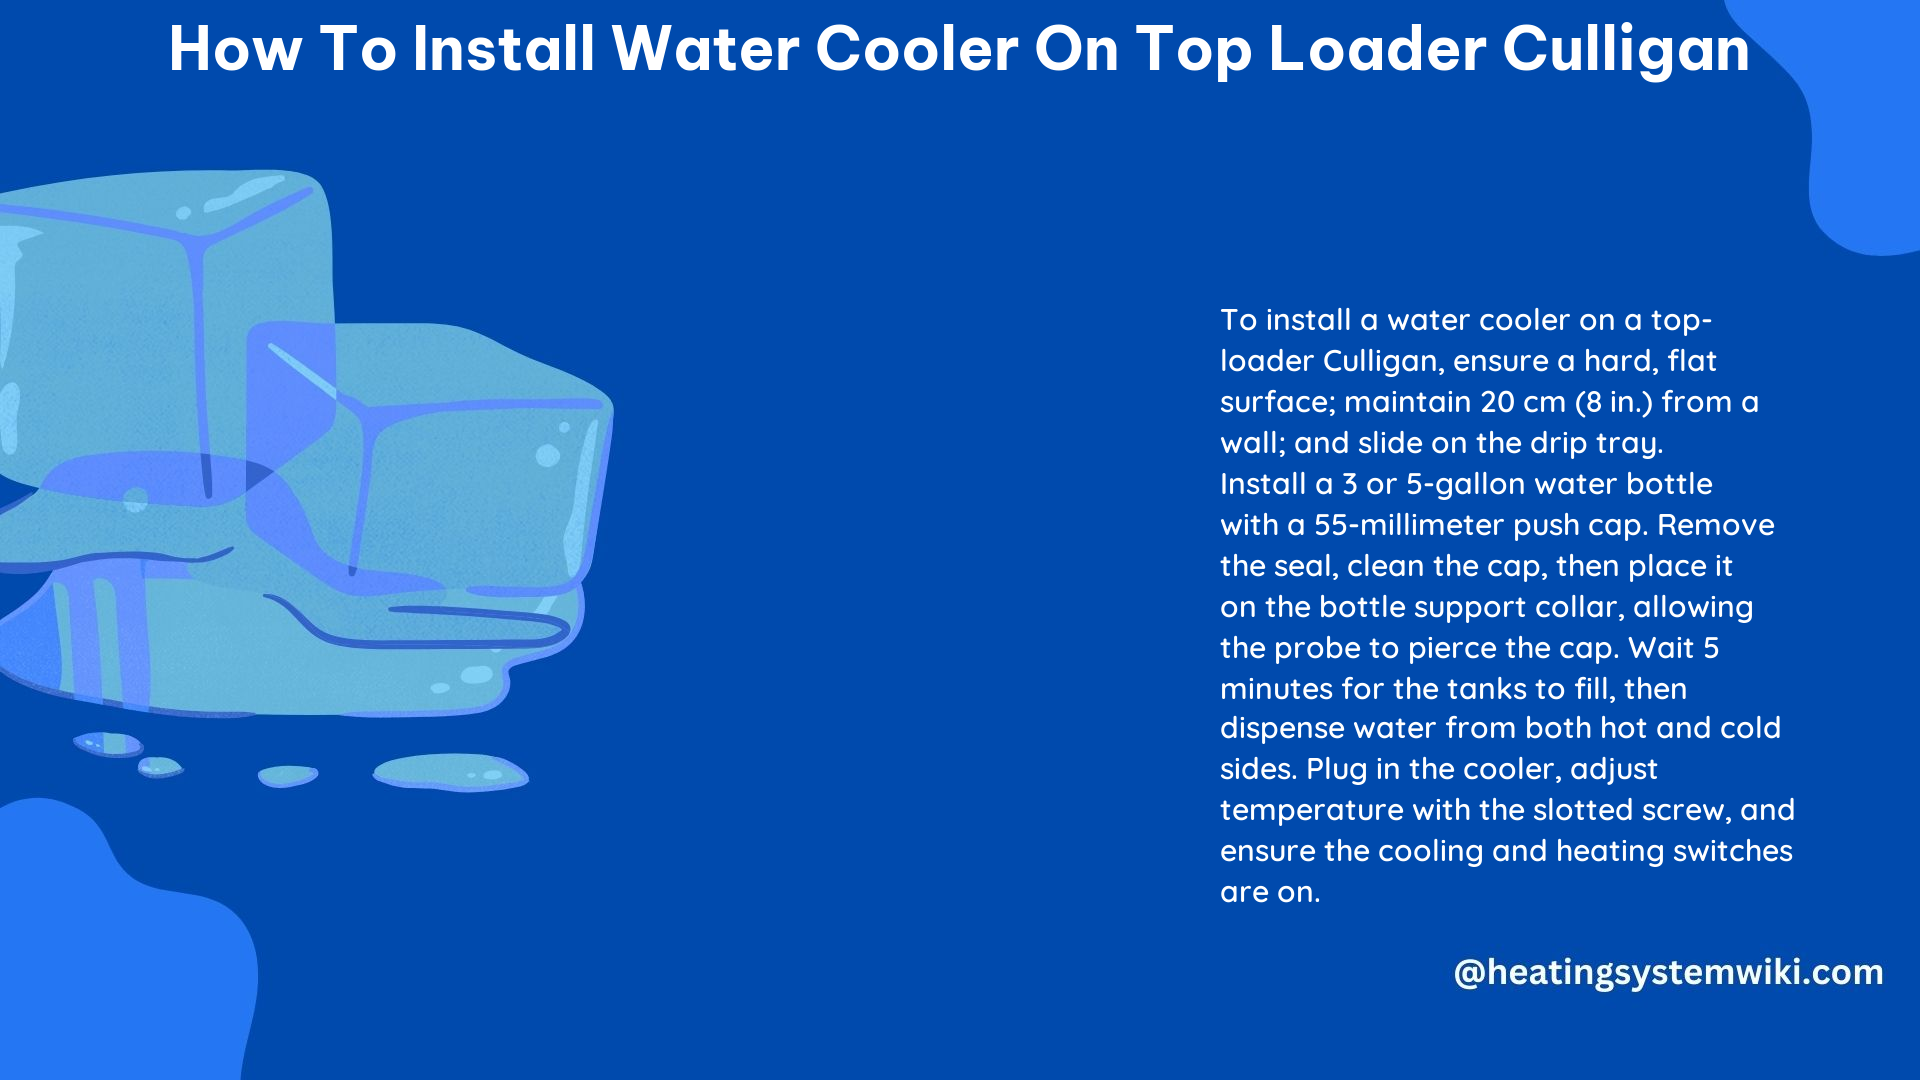 How to Install Water Cooler on Top Loader Culligan